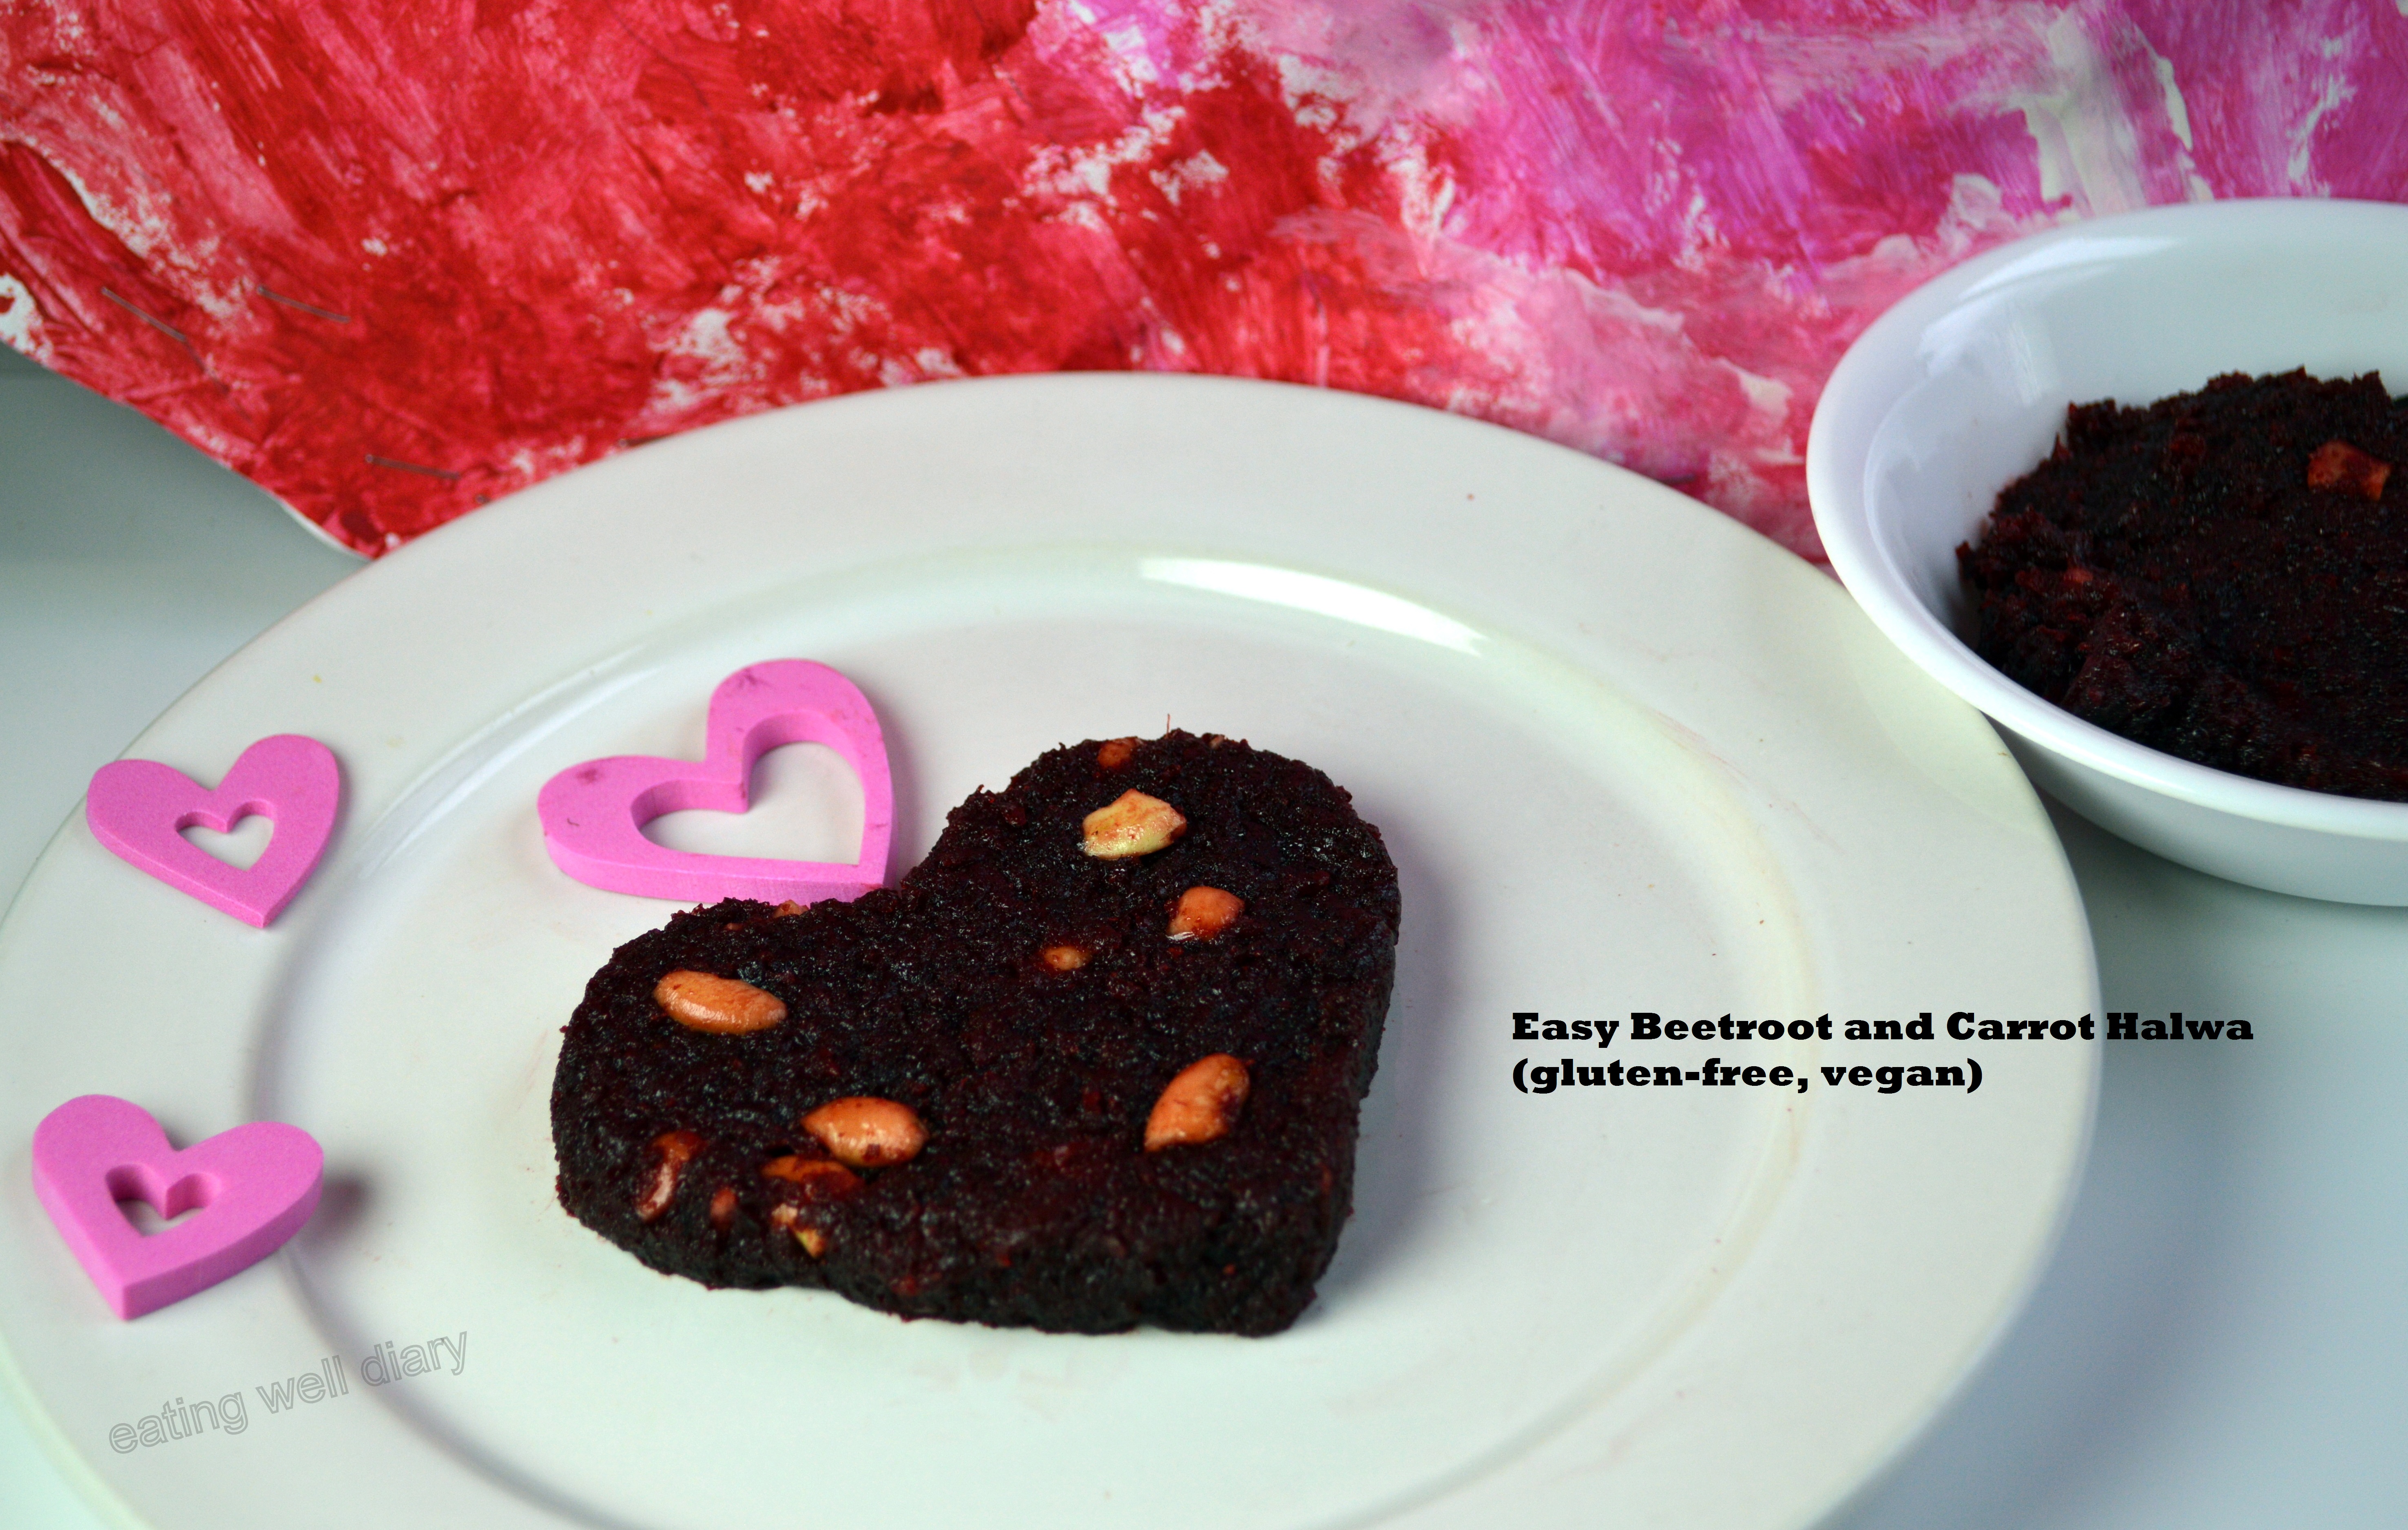 Easy Beetroot and Carrot Fudge/ Halwa- Valentine’s Day Special (Gluten-free, Vegan)